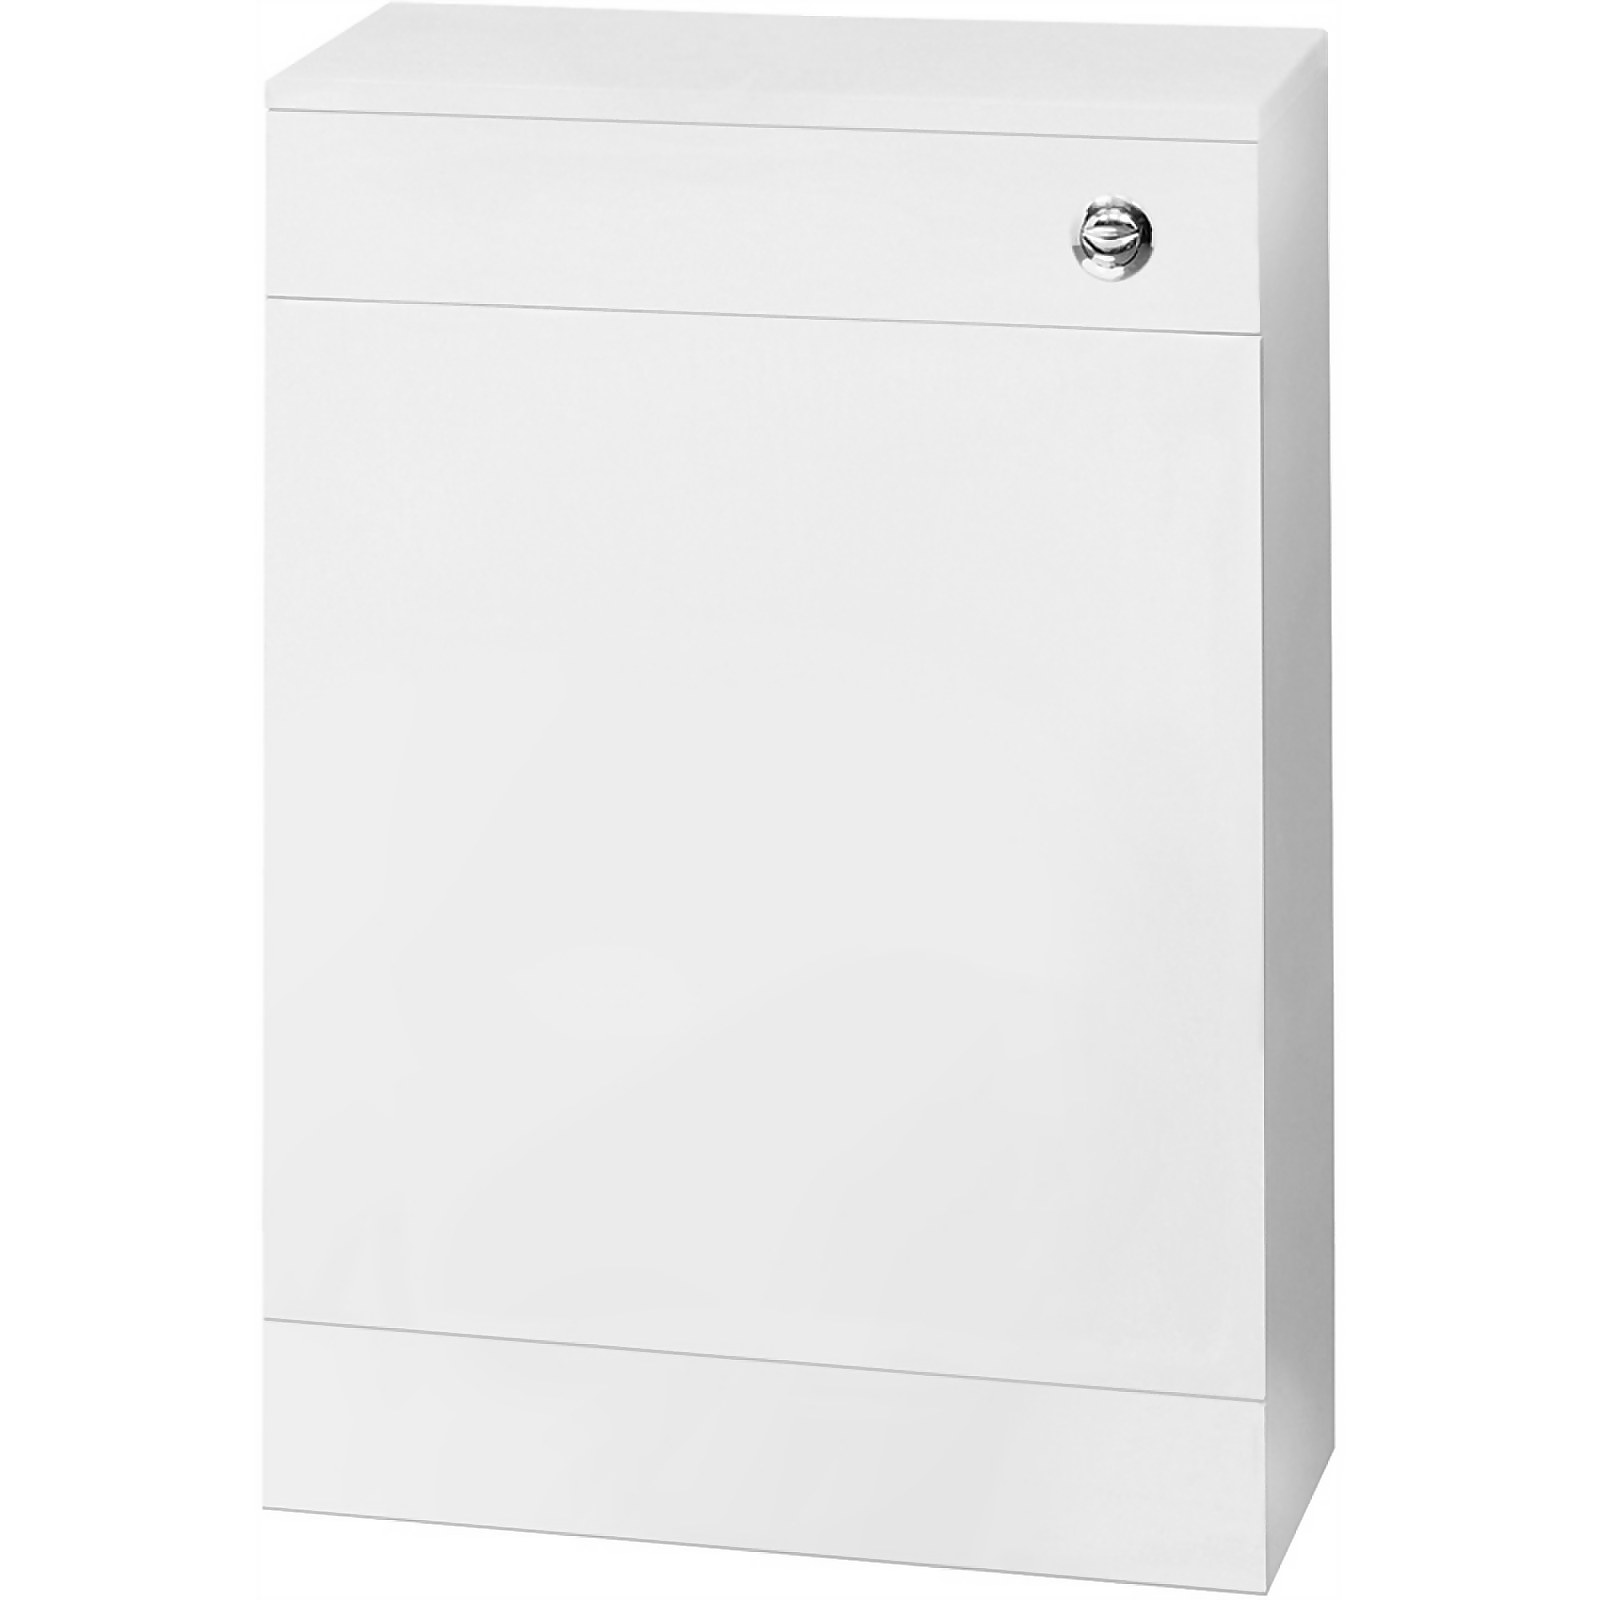 Photo of Balterley Orbit 500mm Wc Unit With Concealed Cistern - Gloss White